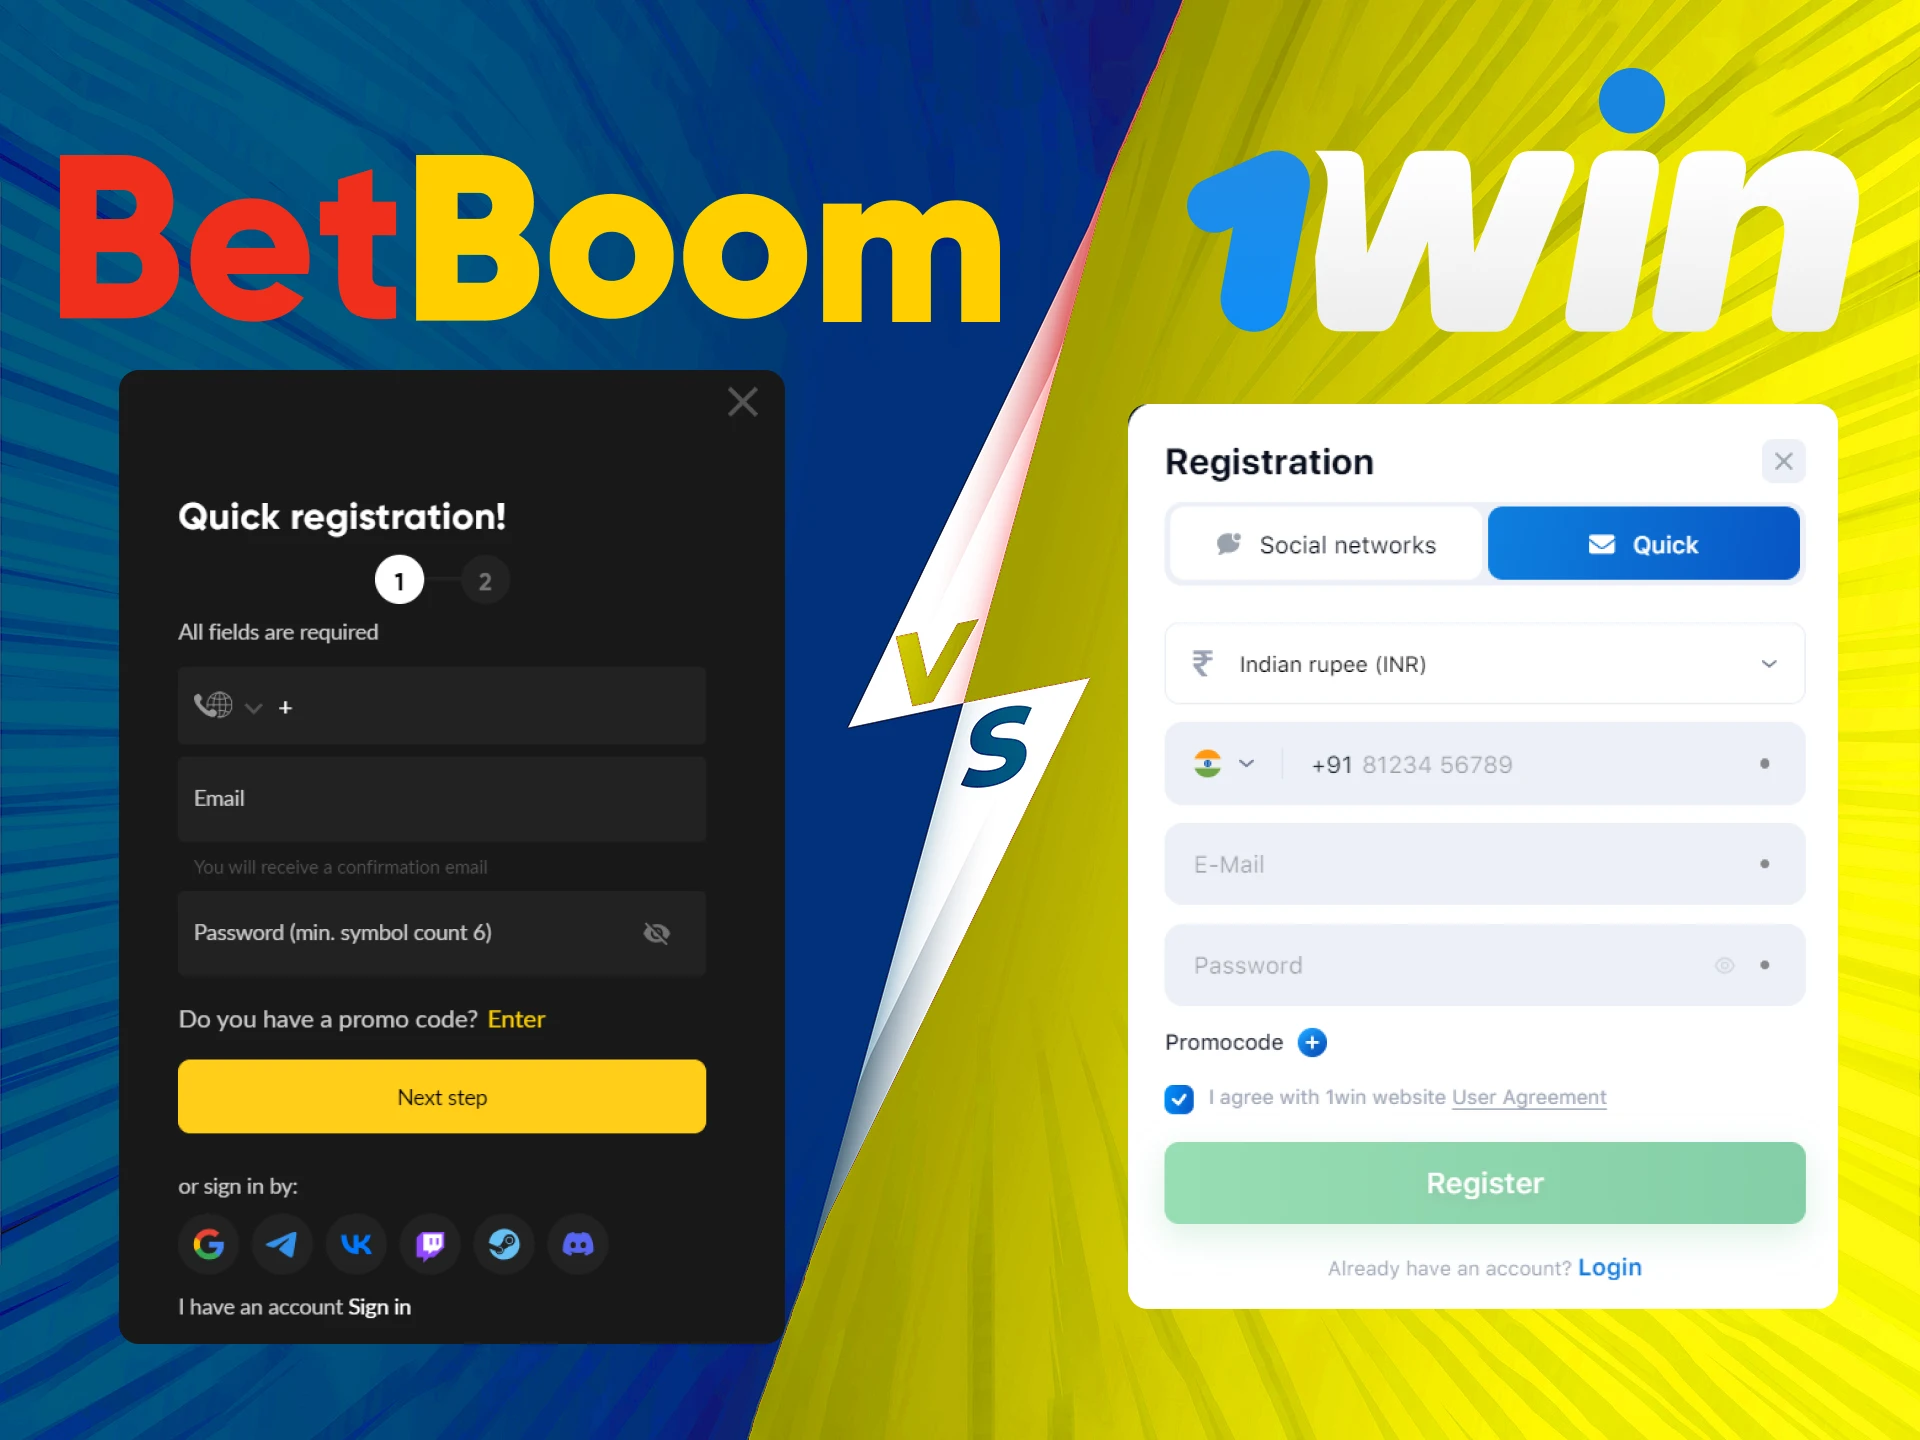 Learn the differences in the registration process between 1win and BetBoom.